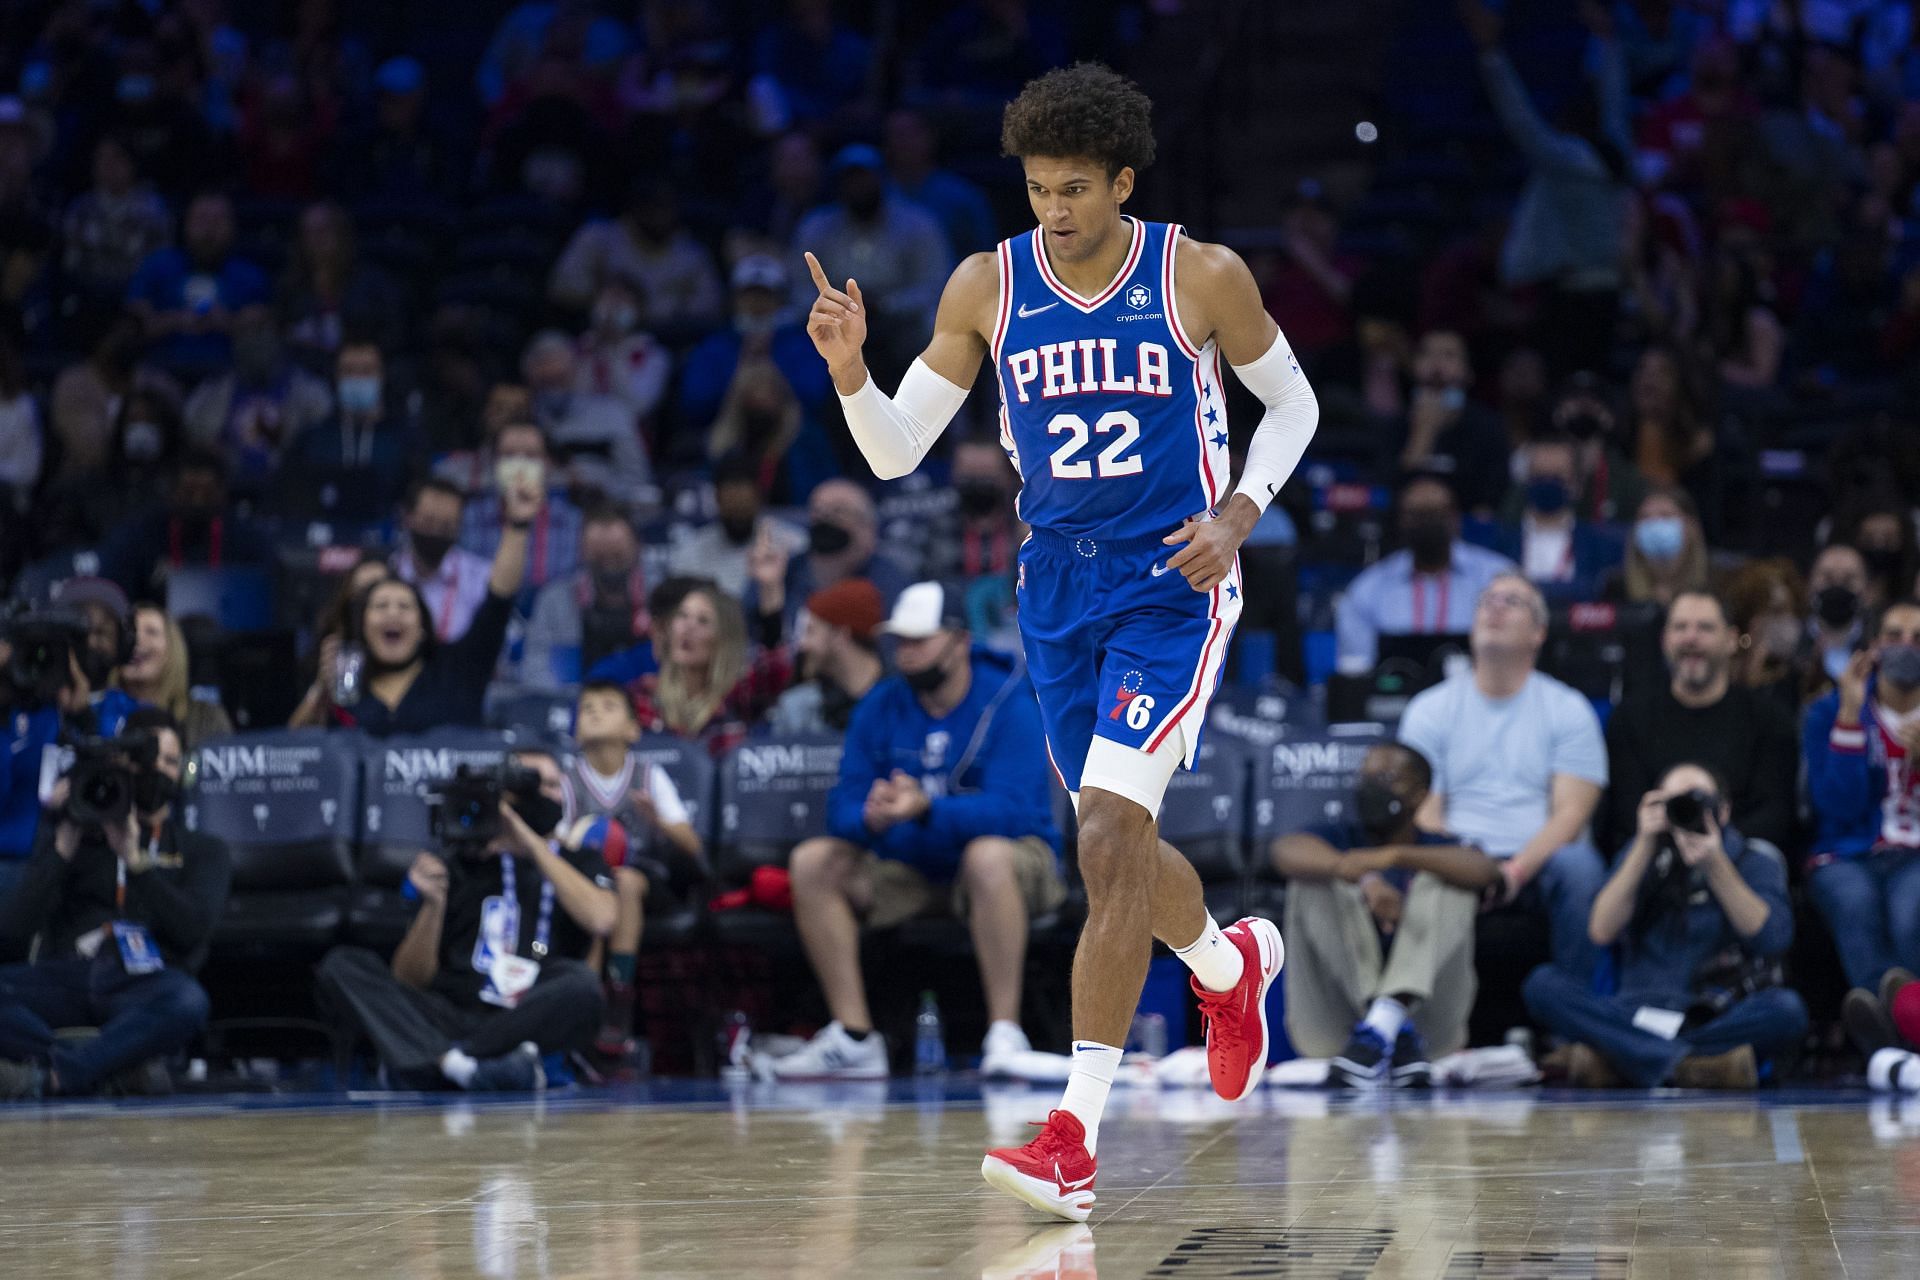 Matisse Thybulle reacts to a play